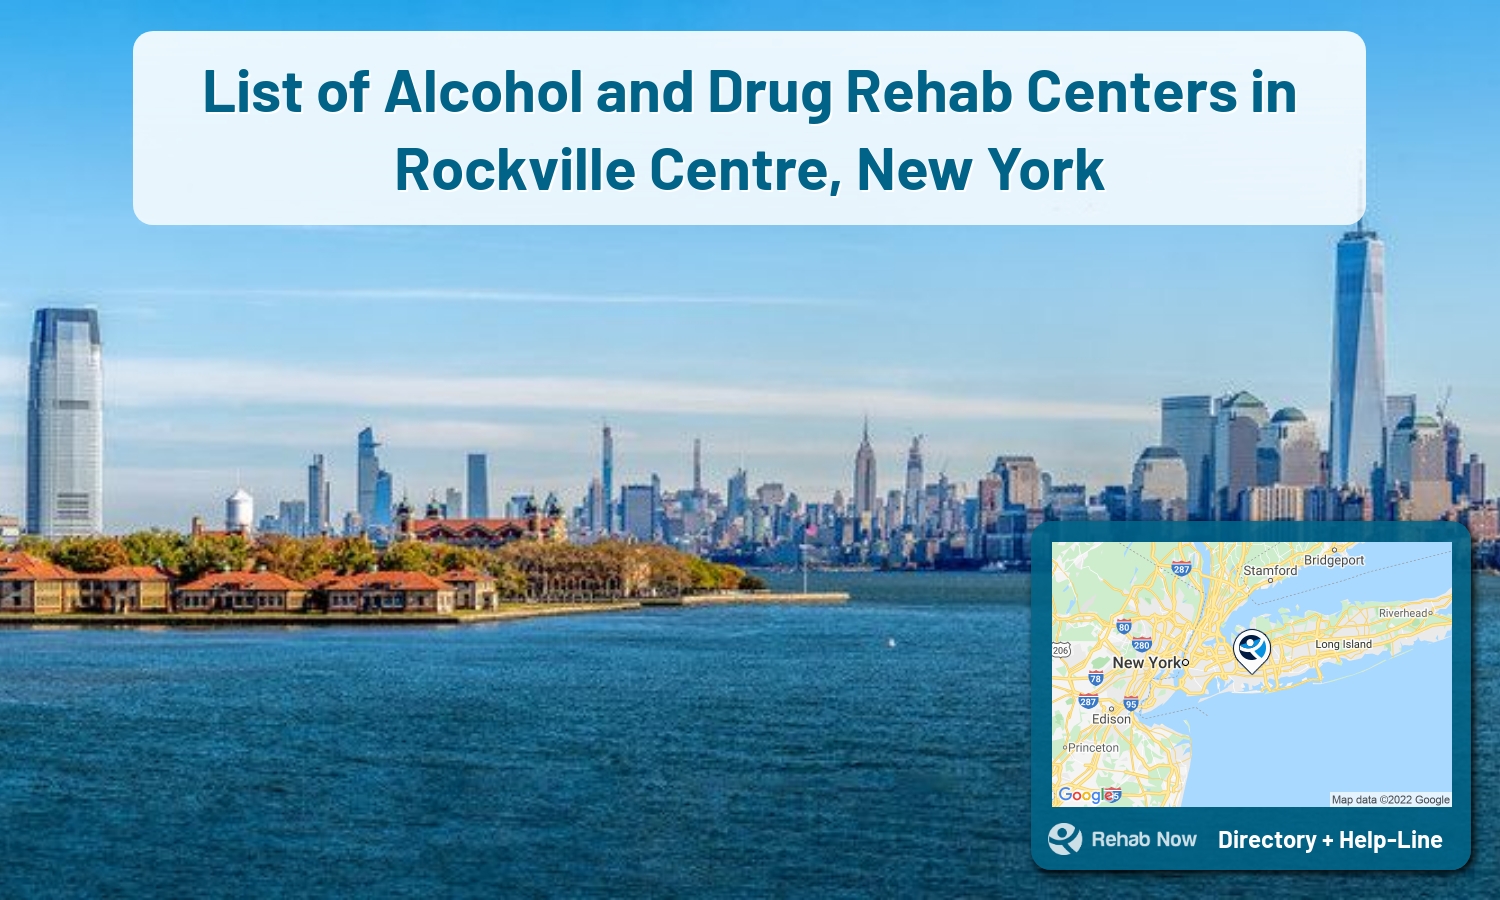 Find drug rehab and alcohol treatment services in Rockville Centre. Our experts help you find a center in Rockville Centre, New York